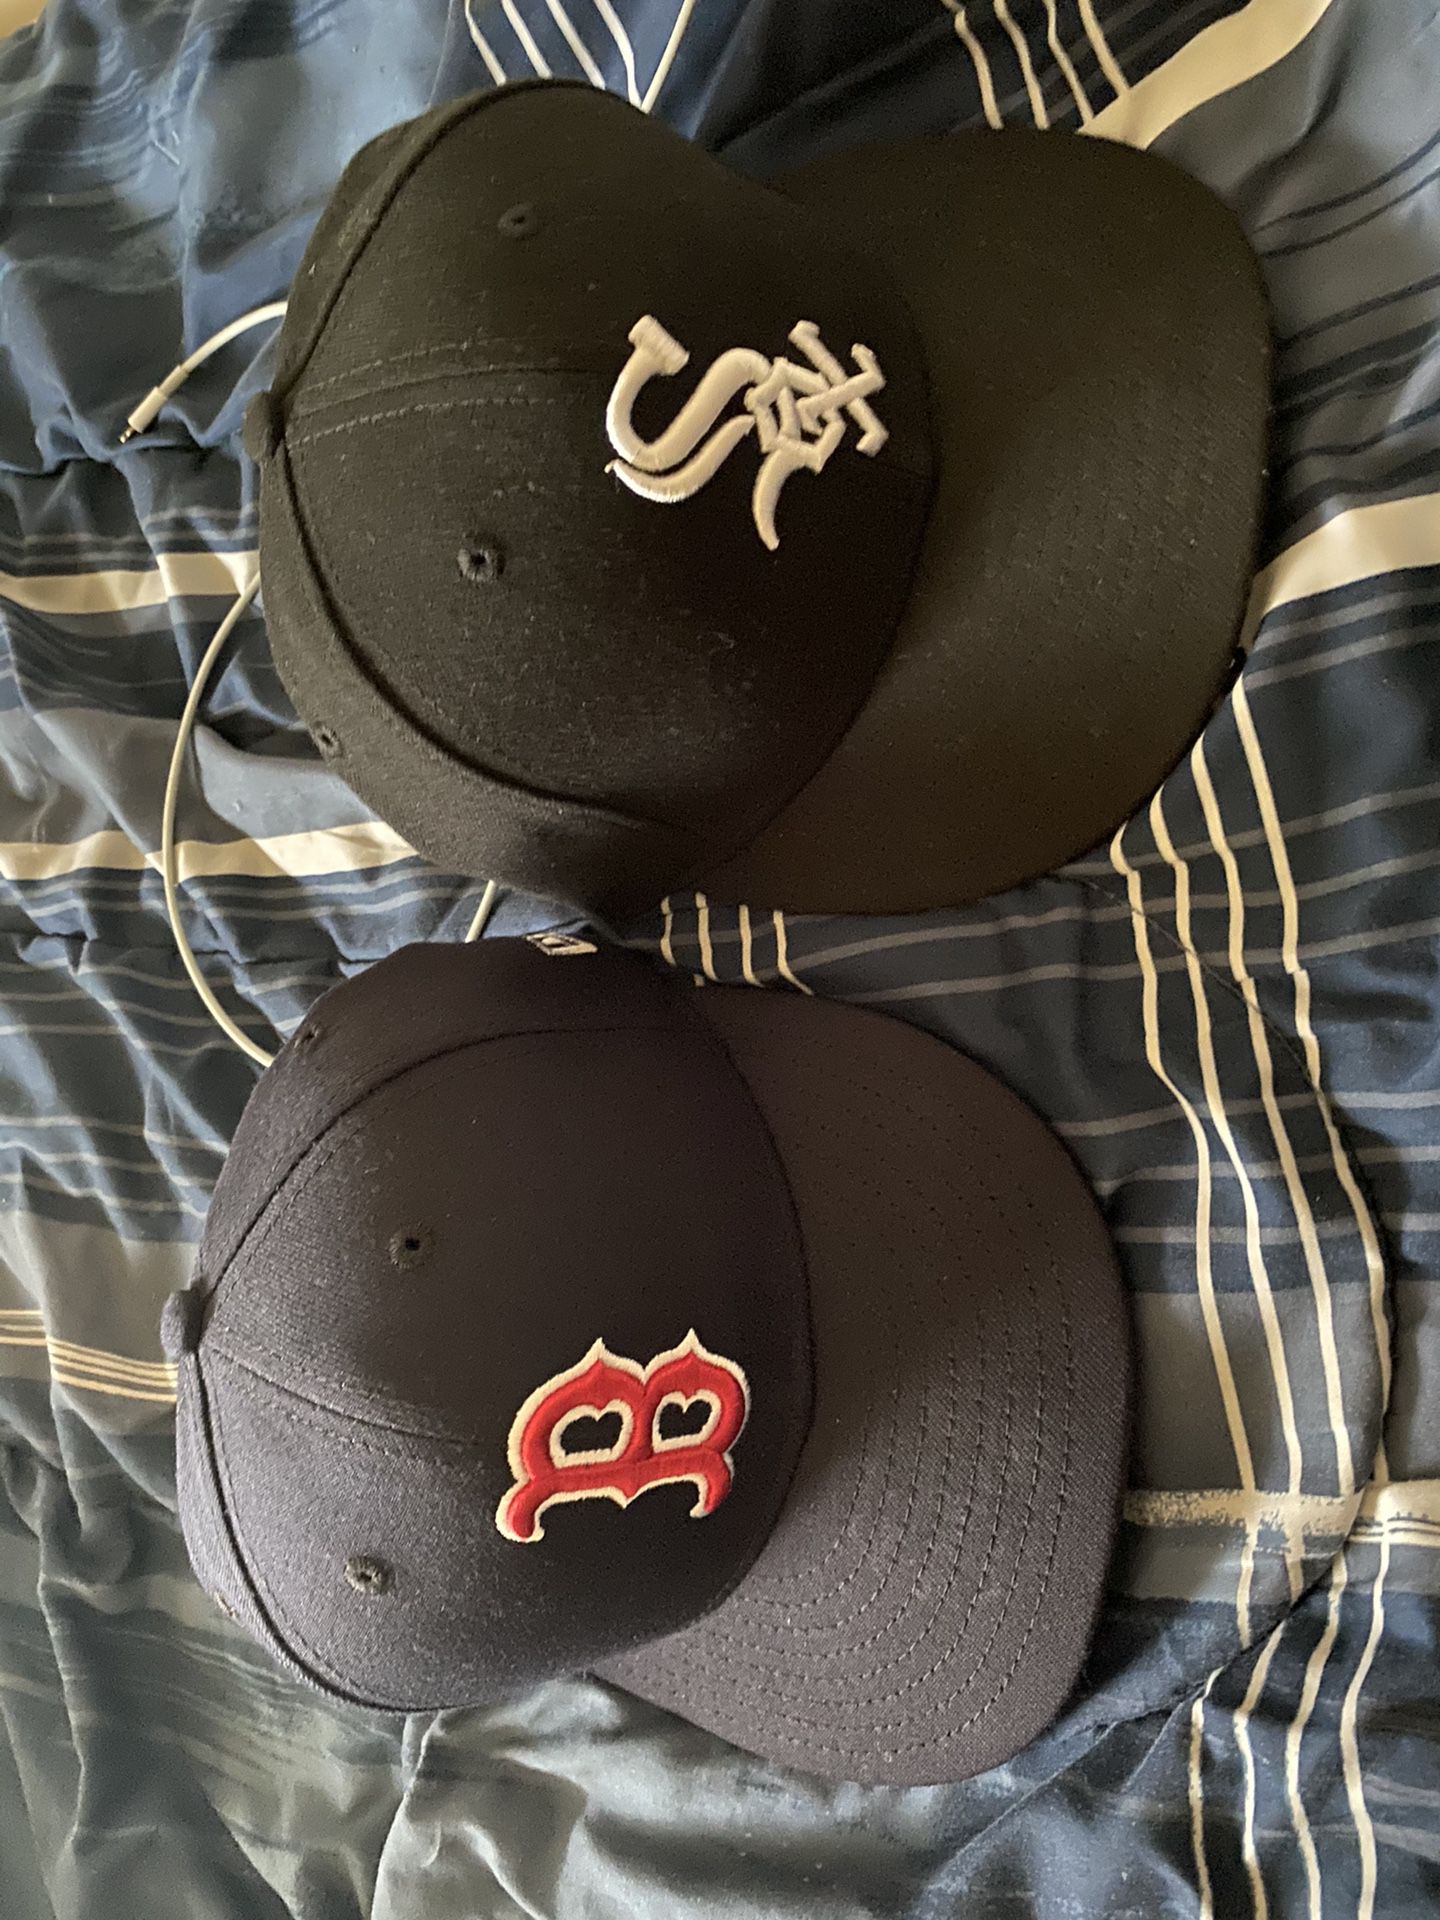 7 1/8 new era hats- Red Sox and white Sox